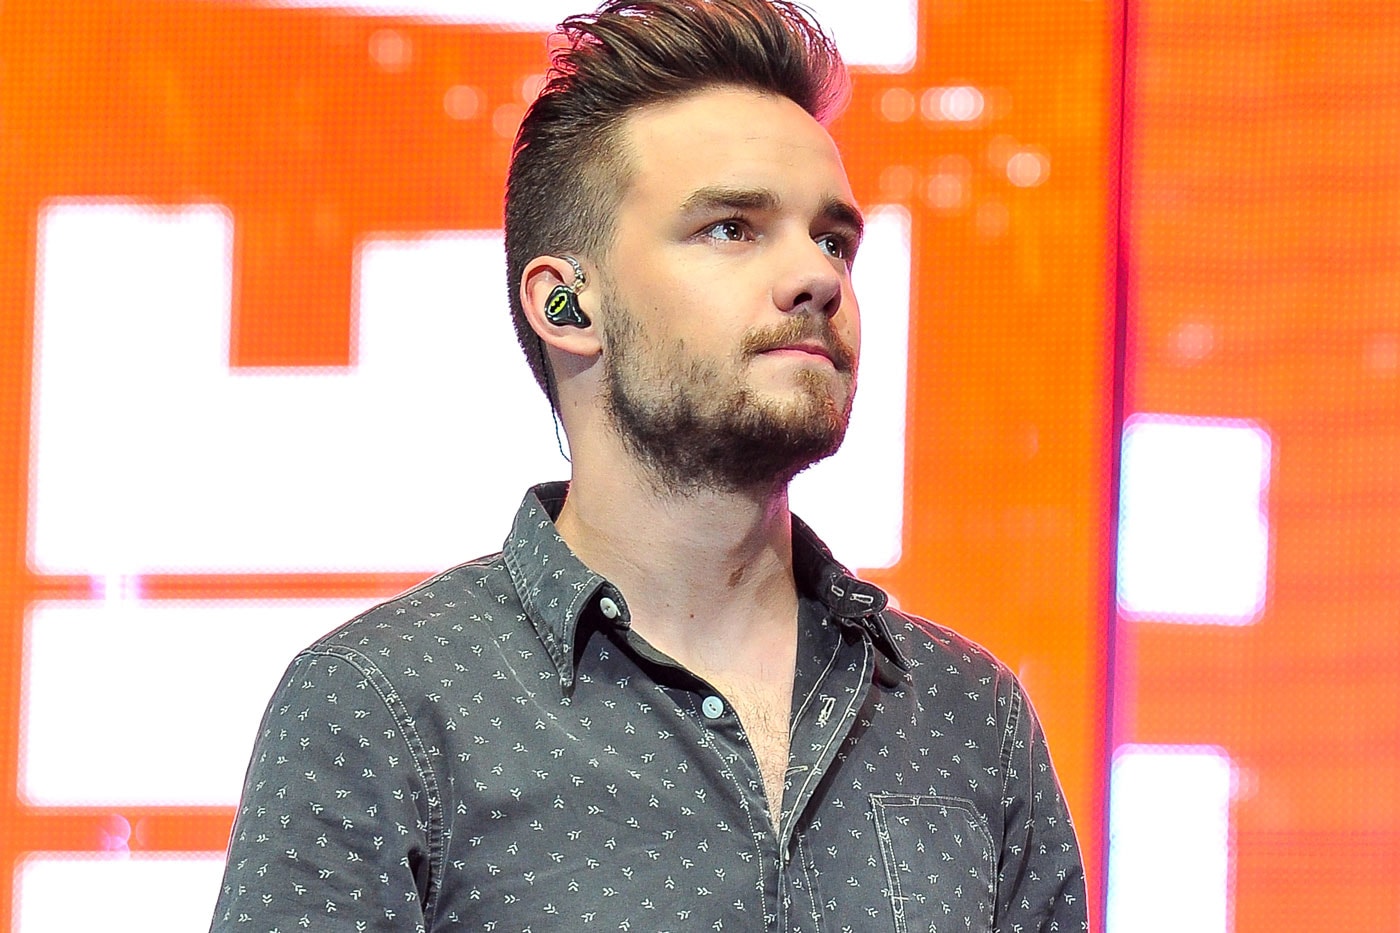 One Direction's Liam Payne & Juicy J's Collab Is Coming Soon